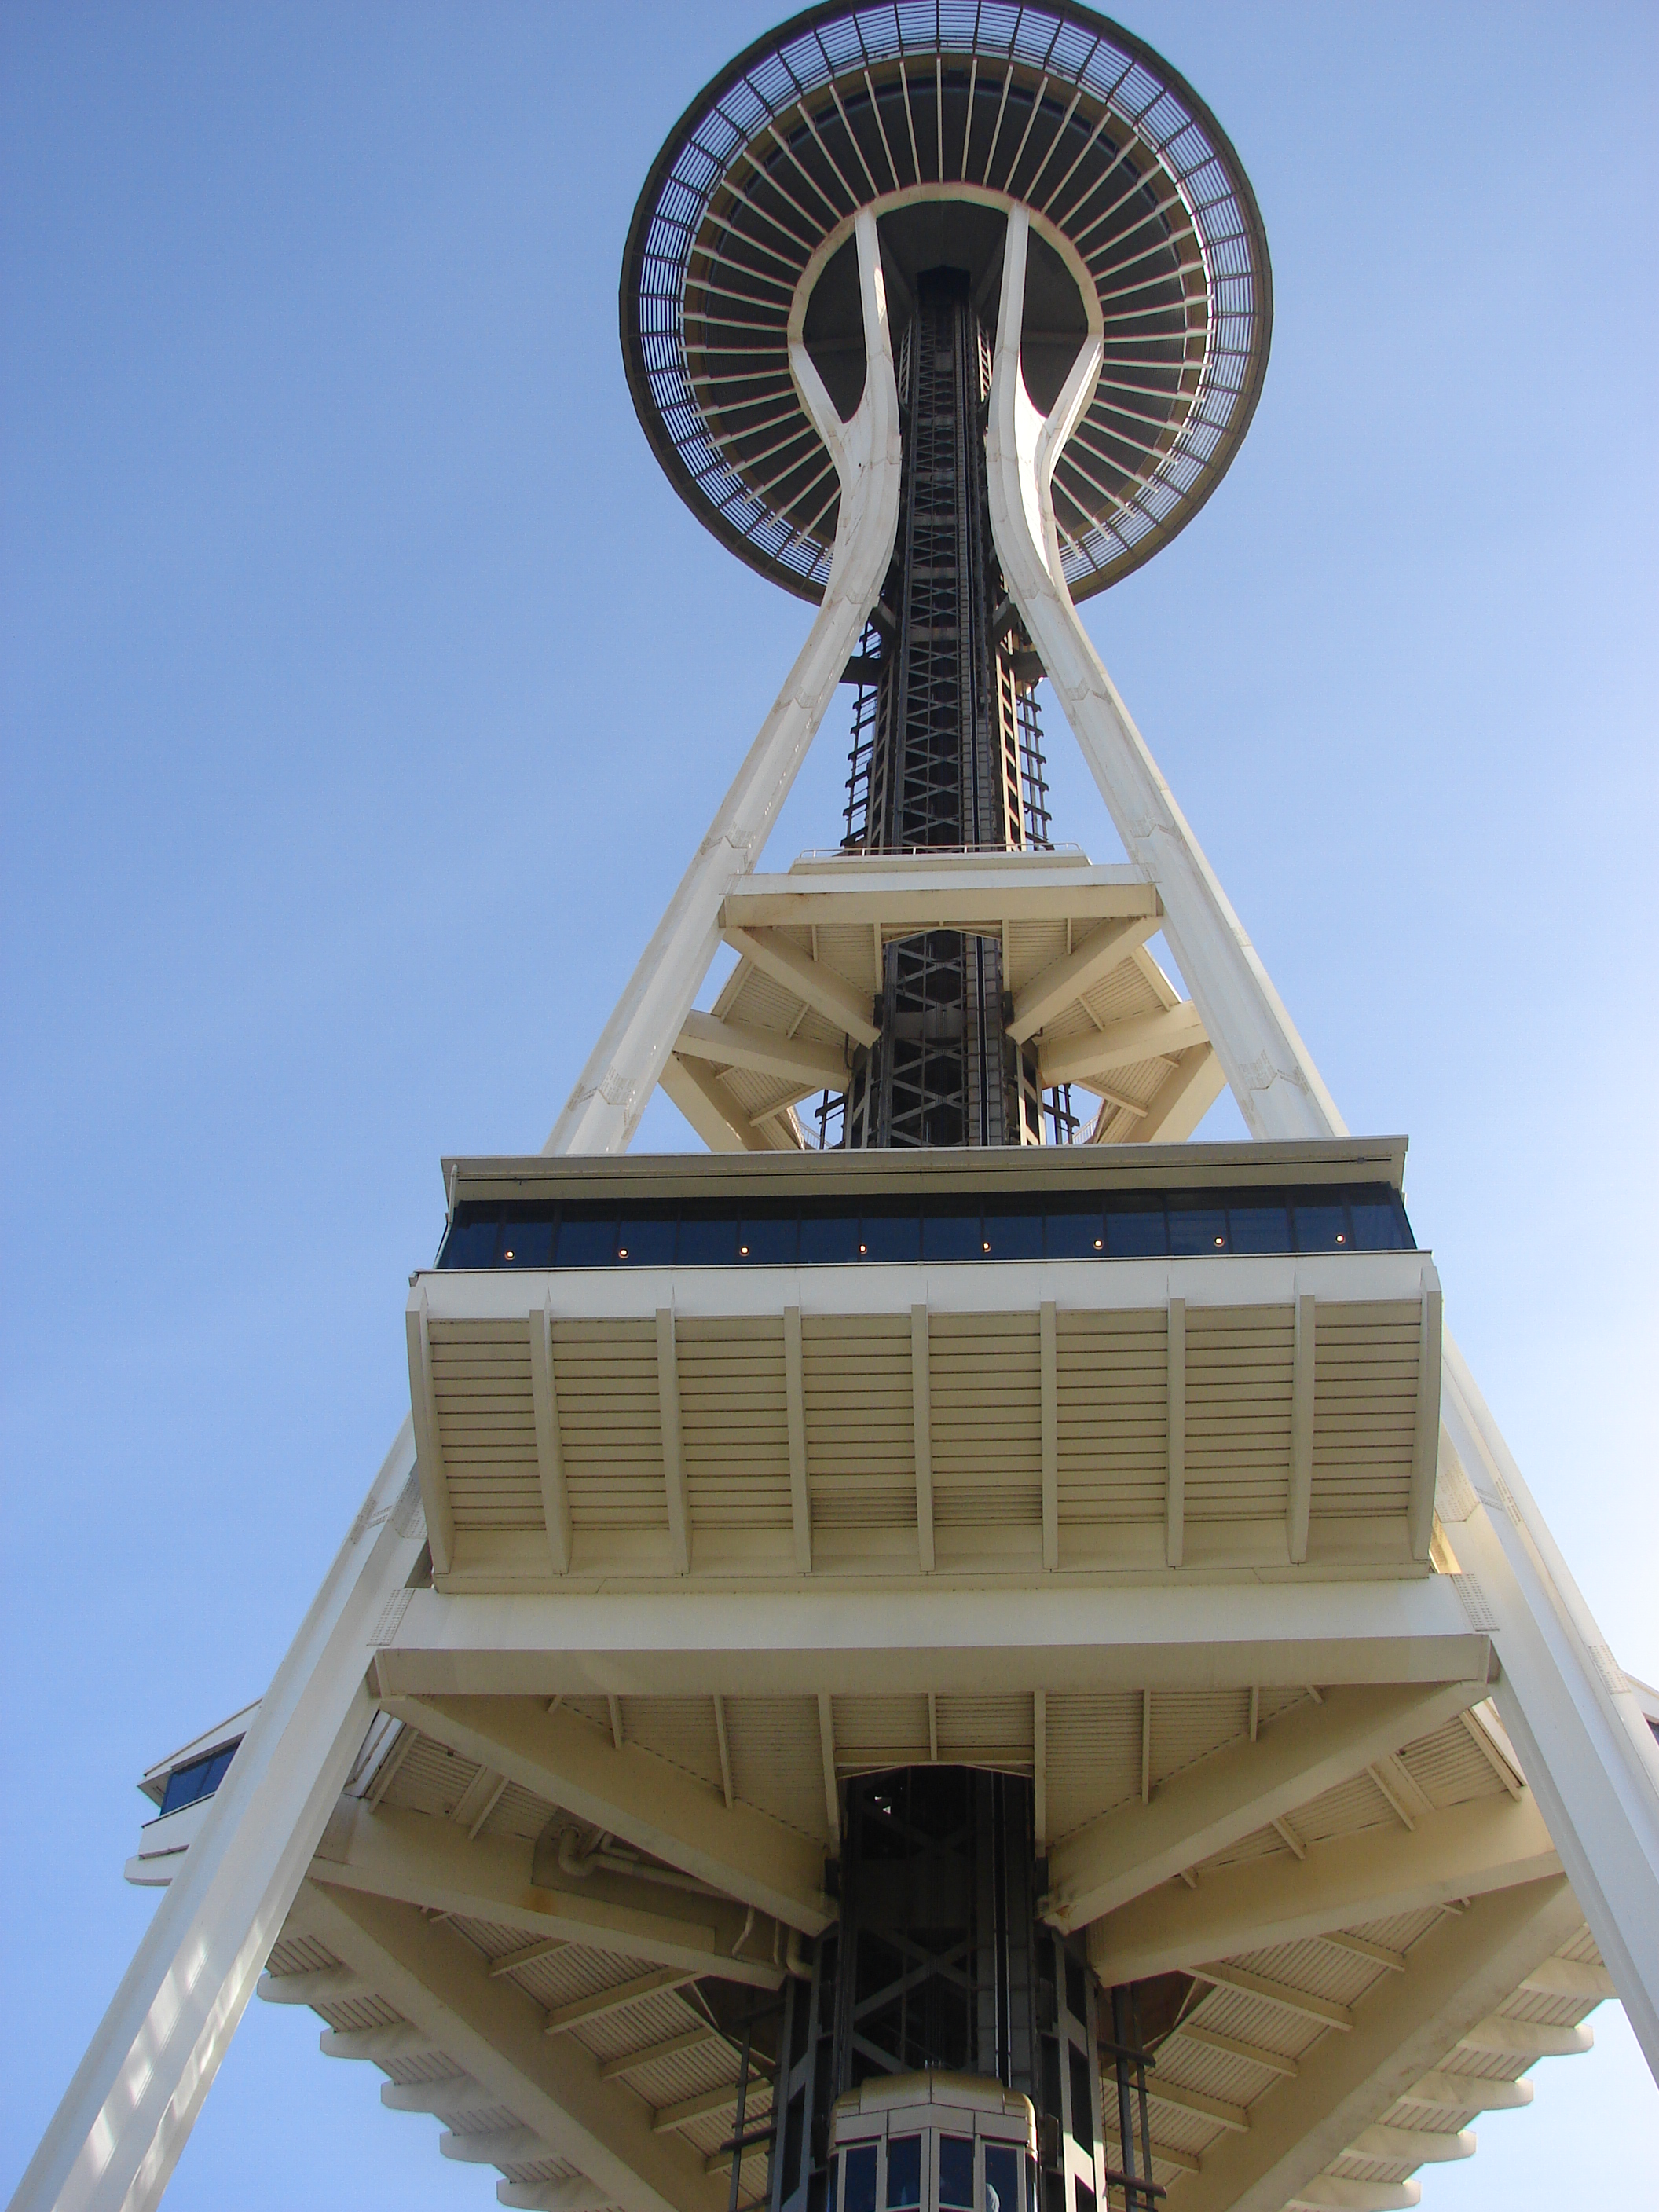 Seattle's famous Space Needle